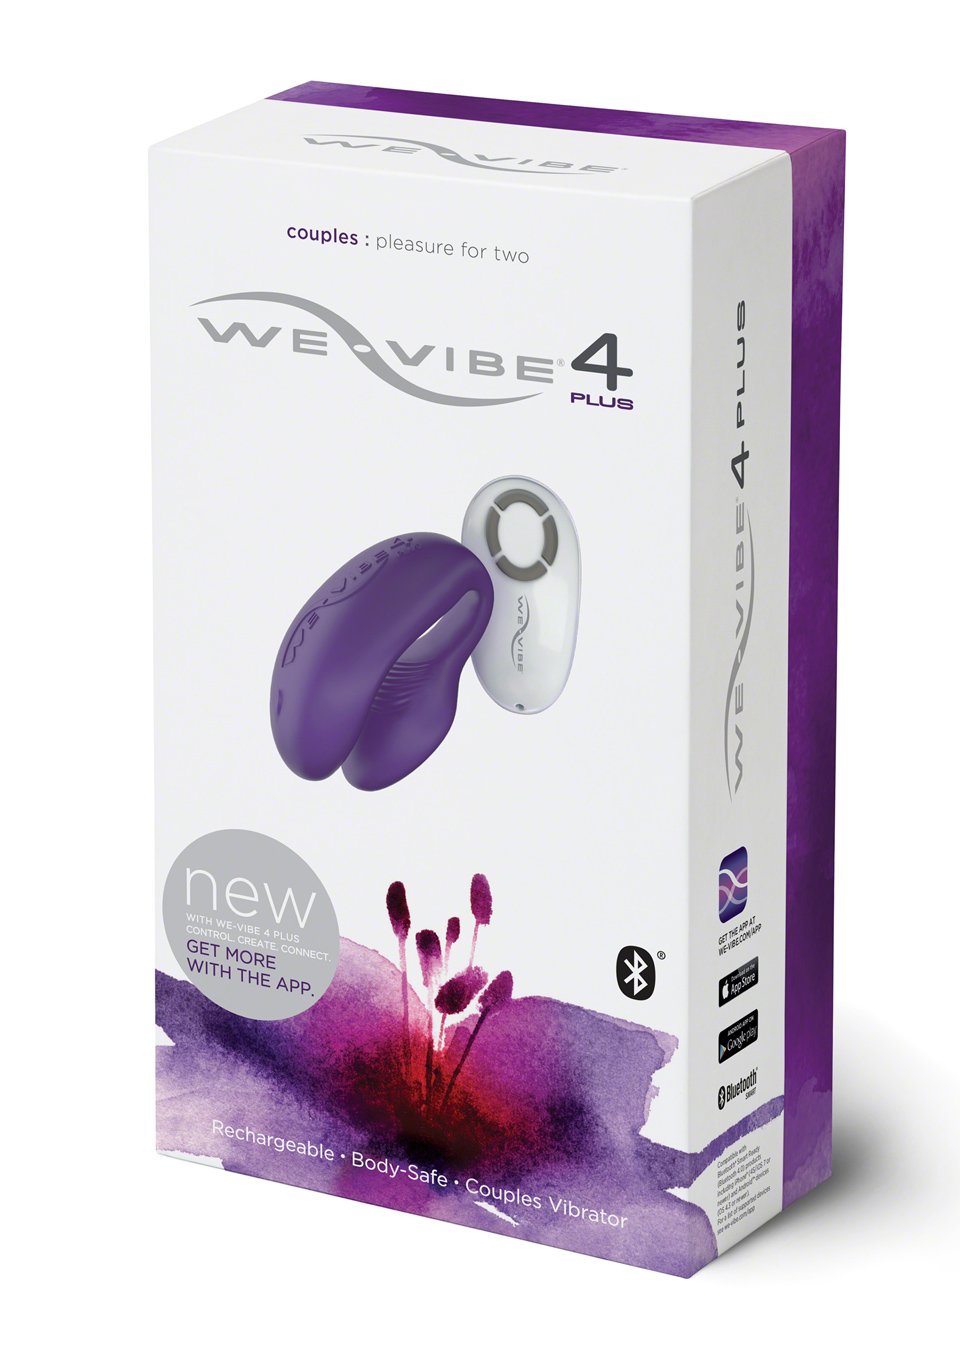 cory sealey recommends we vibe 4 plus video pic